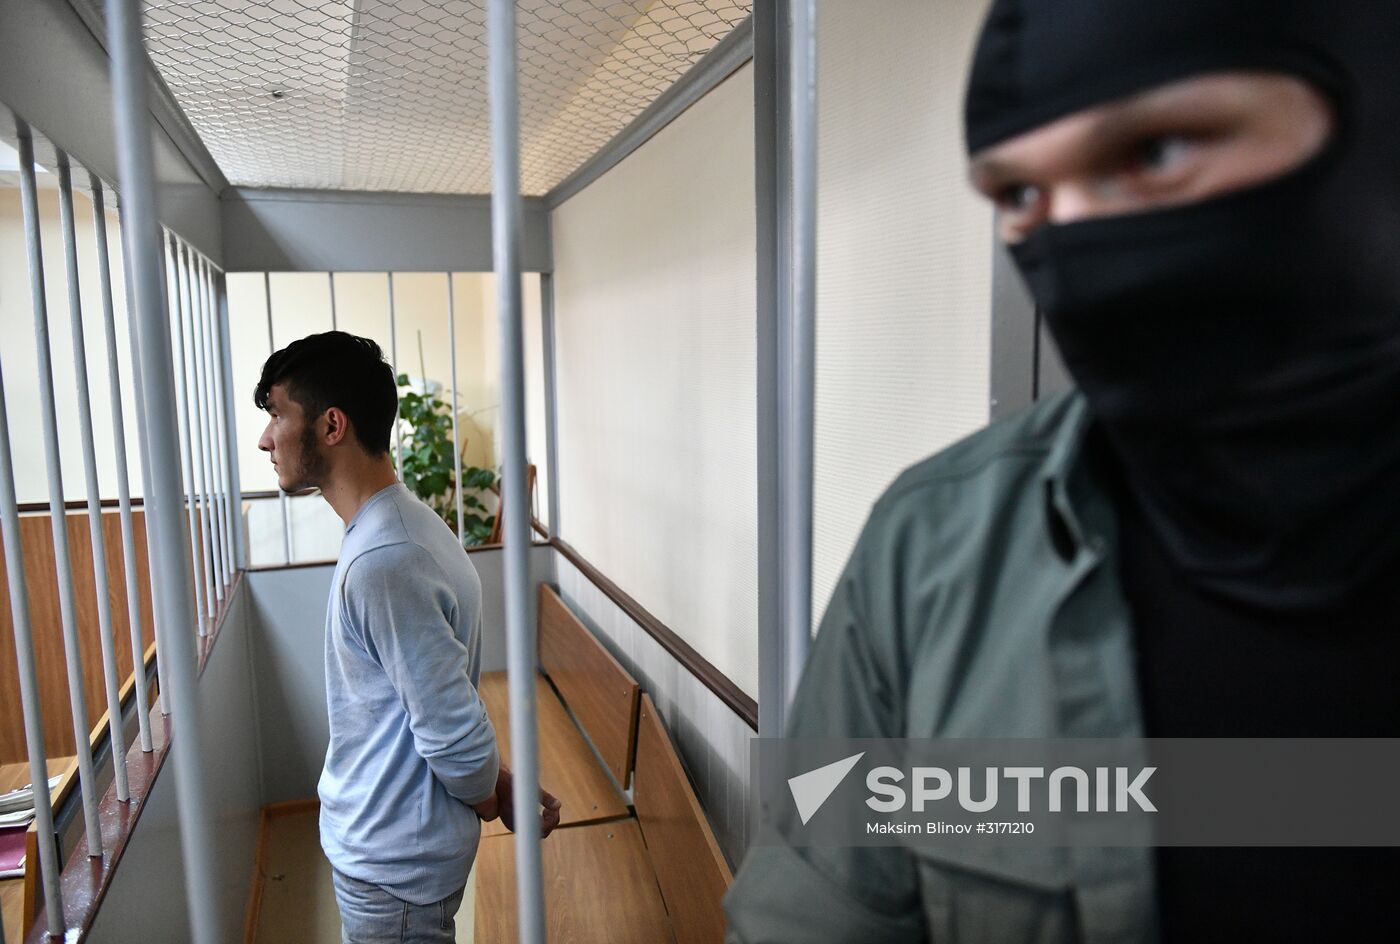 Hearings on motion to arrest suspects of blast preparation in Moscow